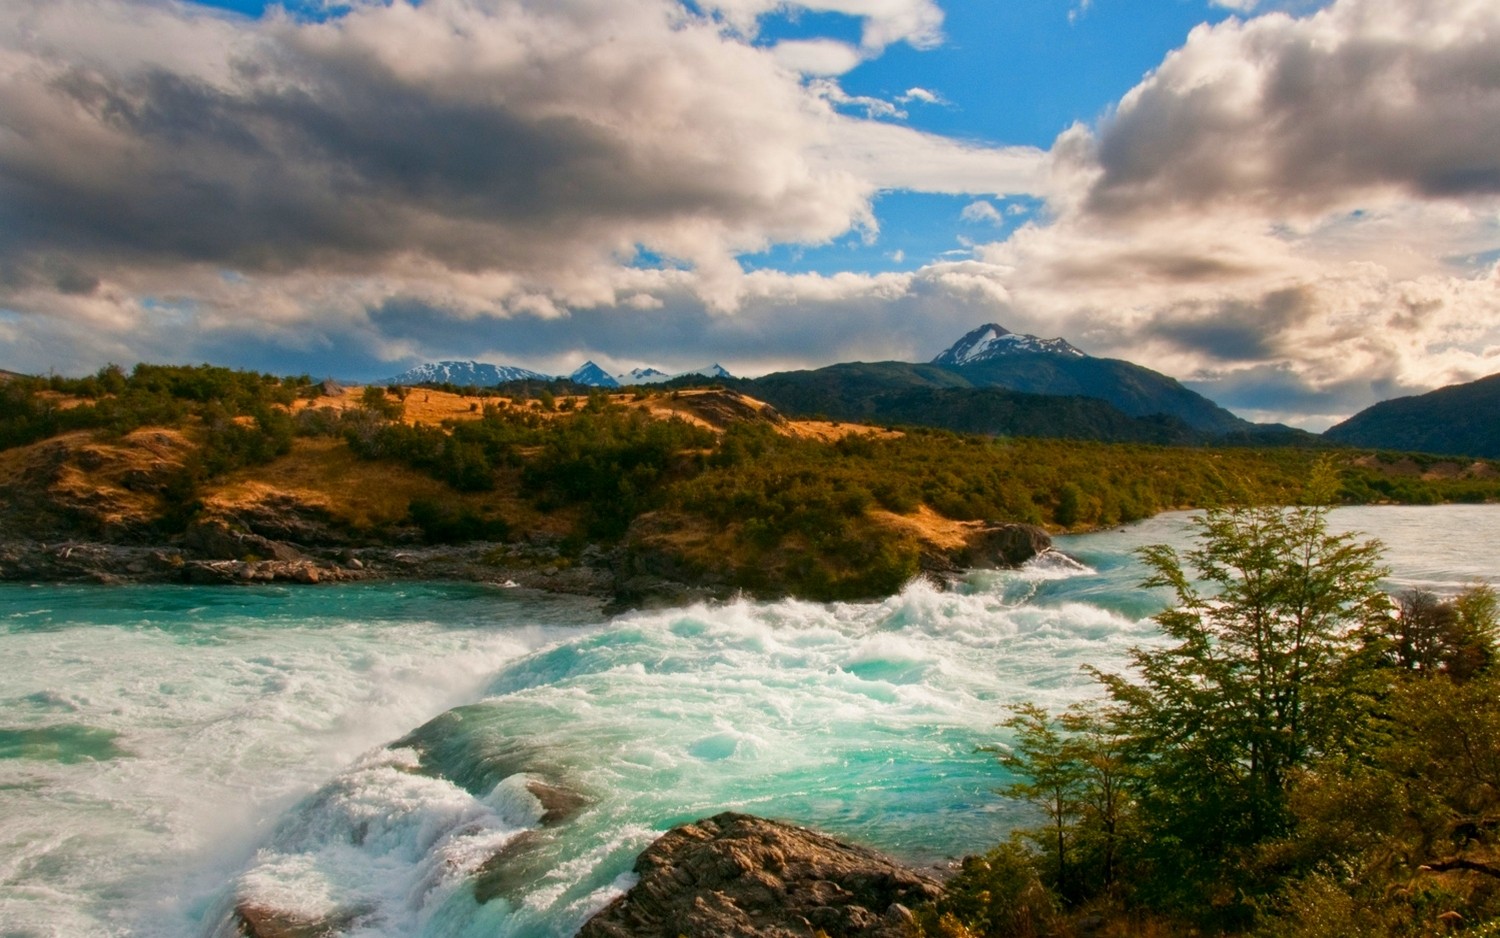 General 1500x938 nature landscape river mountains clouds shrubs Patagonia Chile rapids snowy peak South America